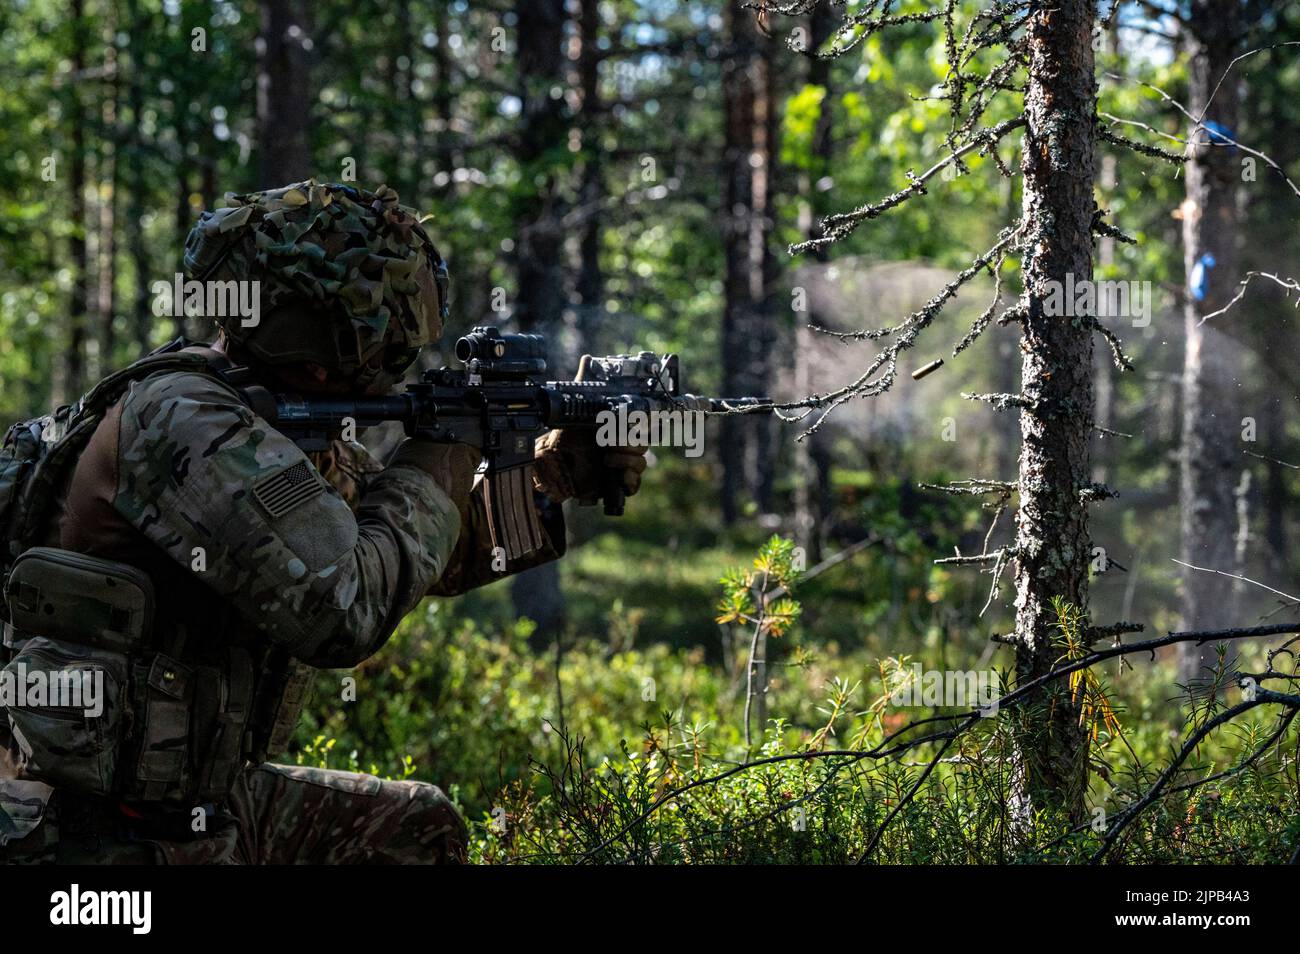 A U.S. Soldier with 1st Battalion, 26th Infantry Regiment, 2nd Brigade Combat Team, 101st Airborne Division (Air Assault) fires an M4A1 carbine during a company combined arms live-fire exercise as part of joint training between the U.S. Army and Finnish army at Rovaniemi, Finland, Aug. 10, 2022. (U.S. Army photo by Capt. Tobias Cukale) Stock Photo